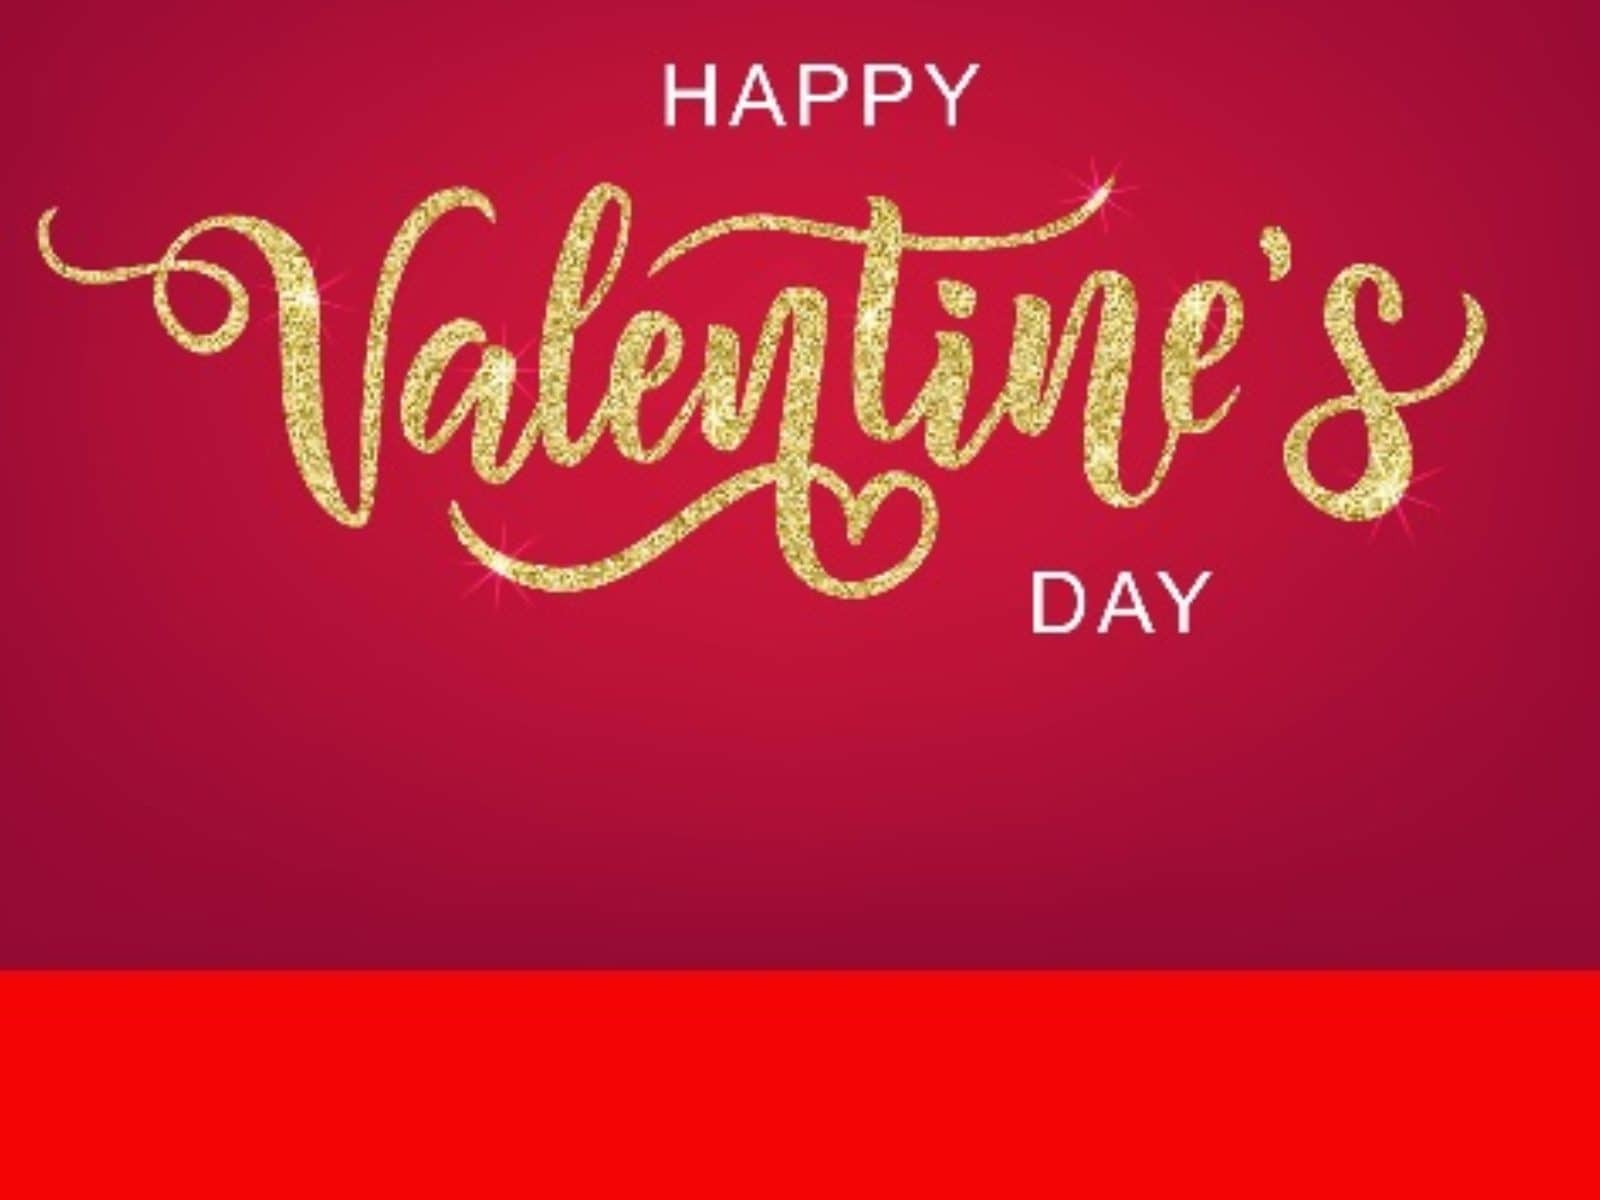 I love you happy valentines day background red Vector Image